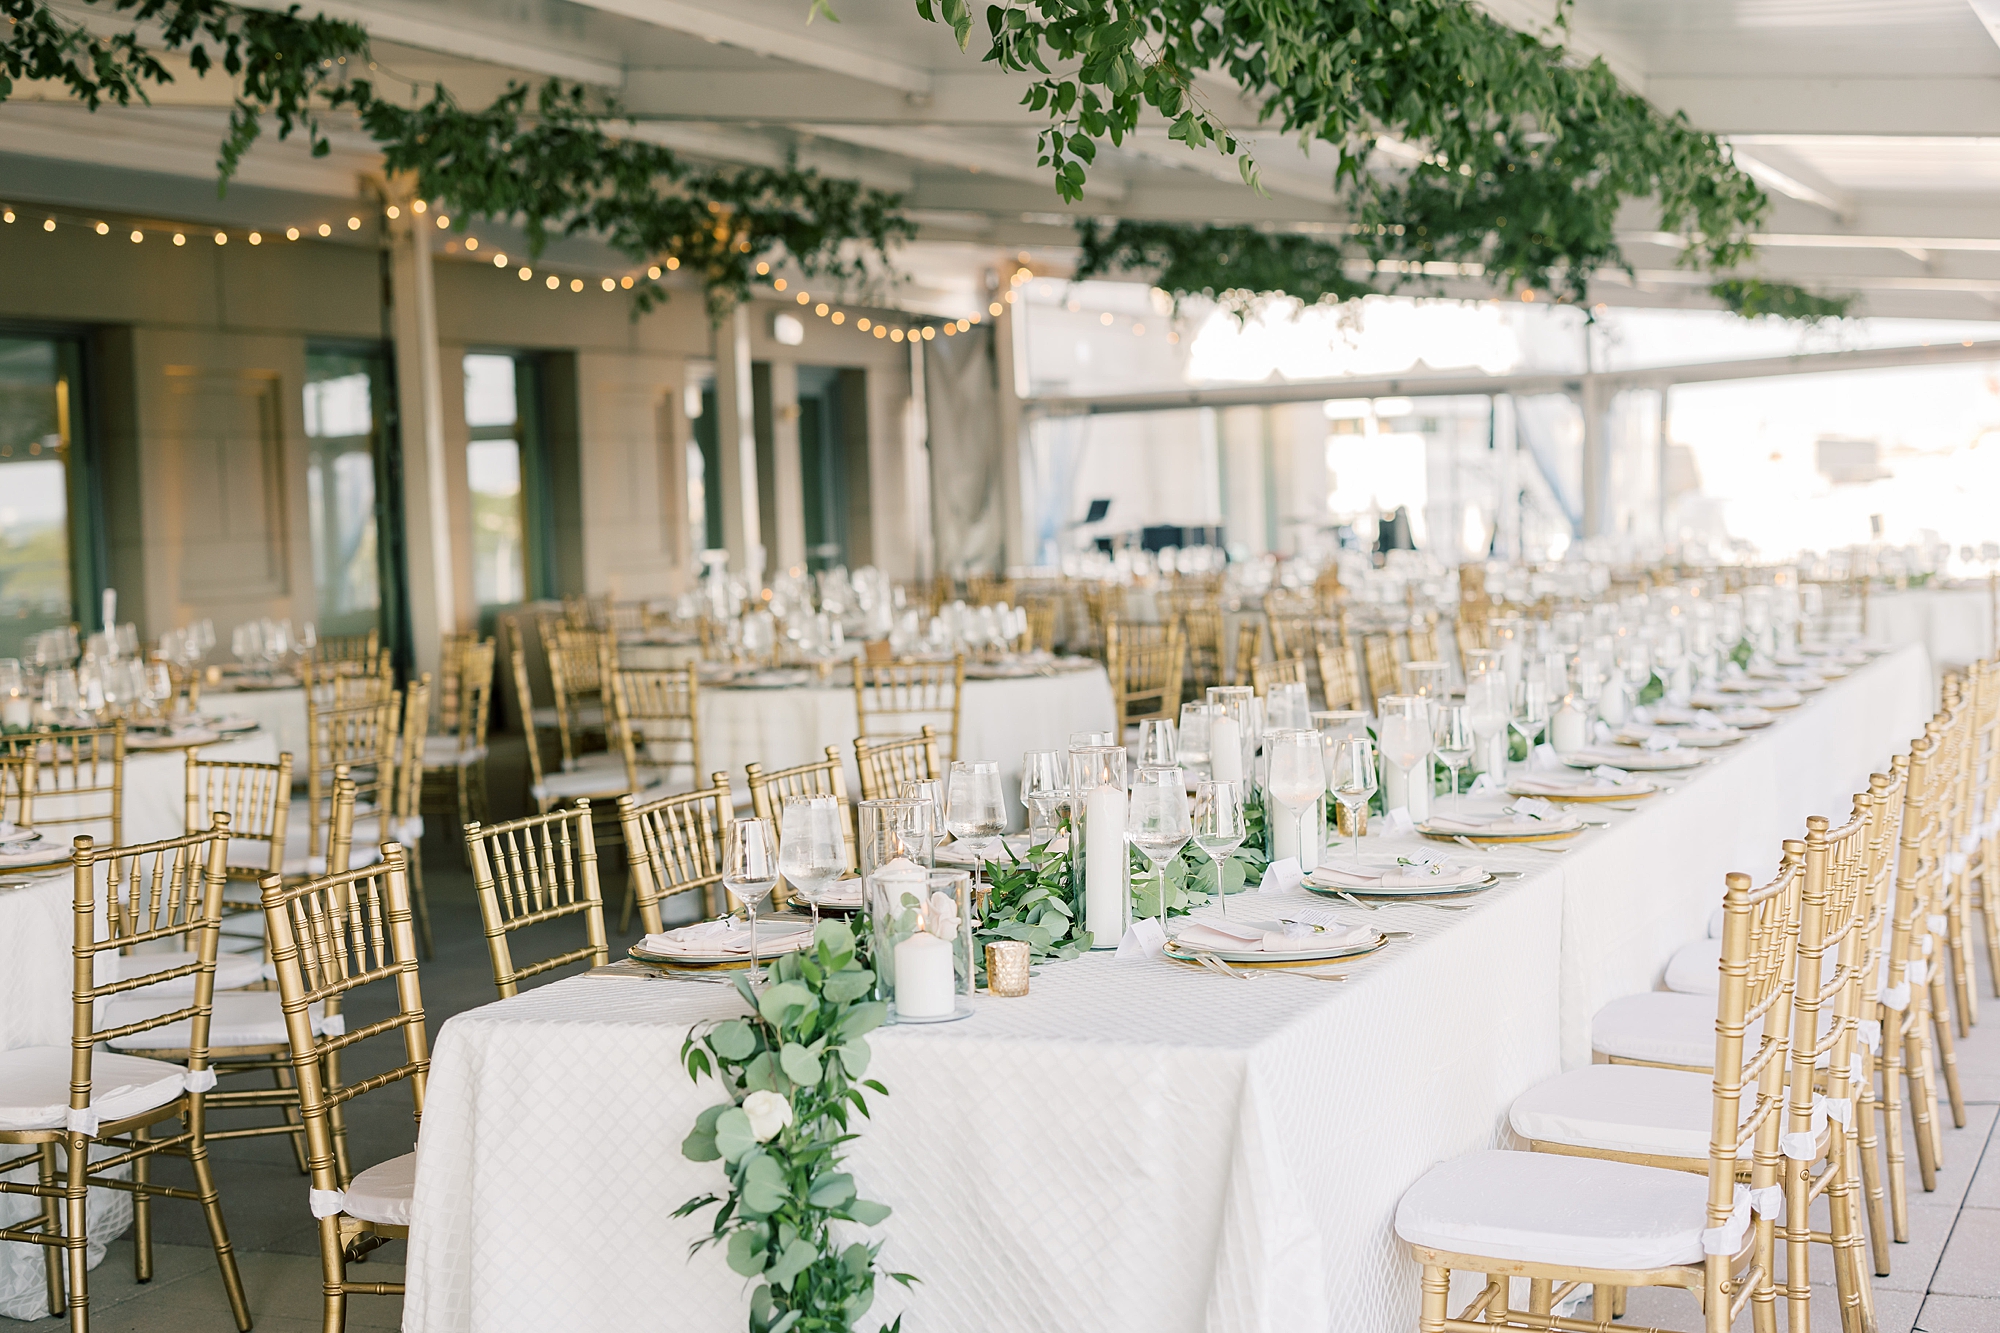 Potomac View Terrace wedding reception with greenery lining tables 